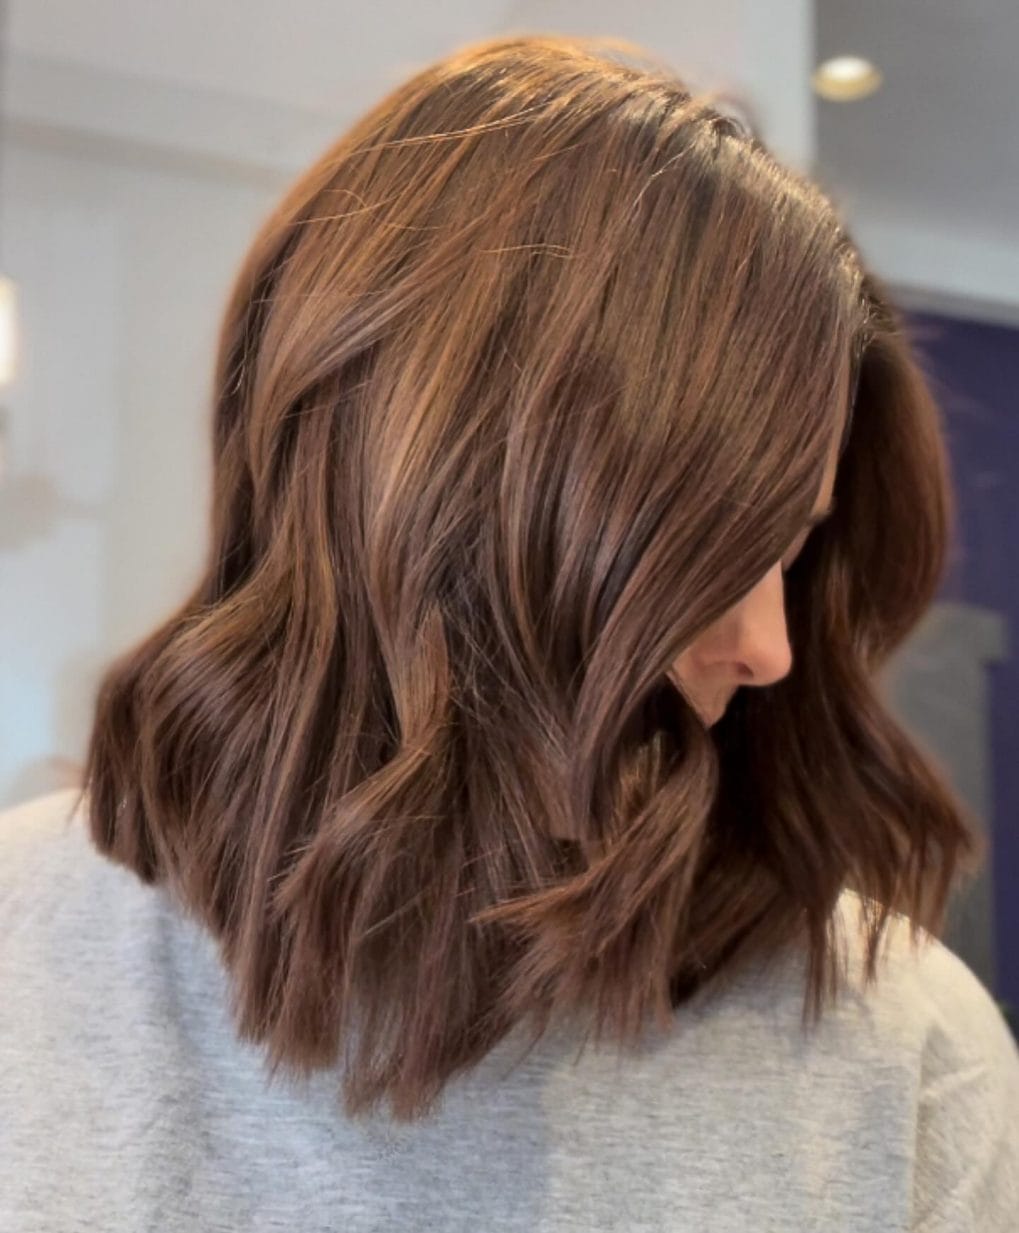 Medium-length chocolate brown with soft layers